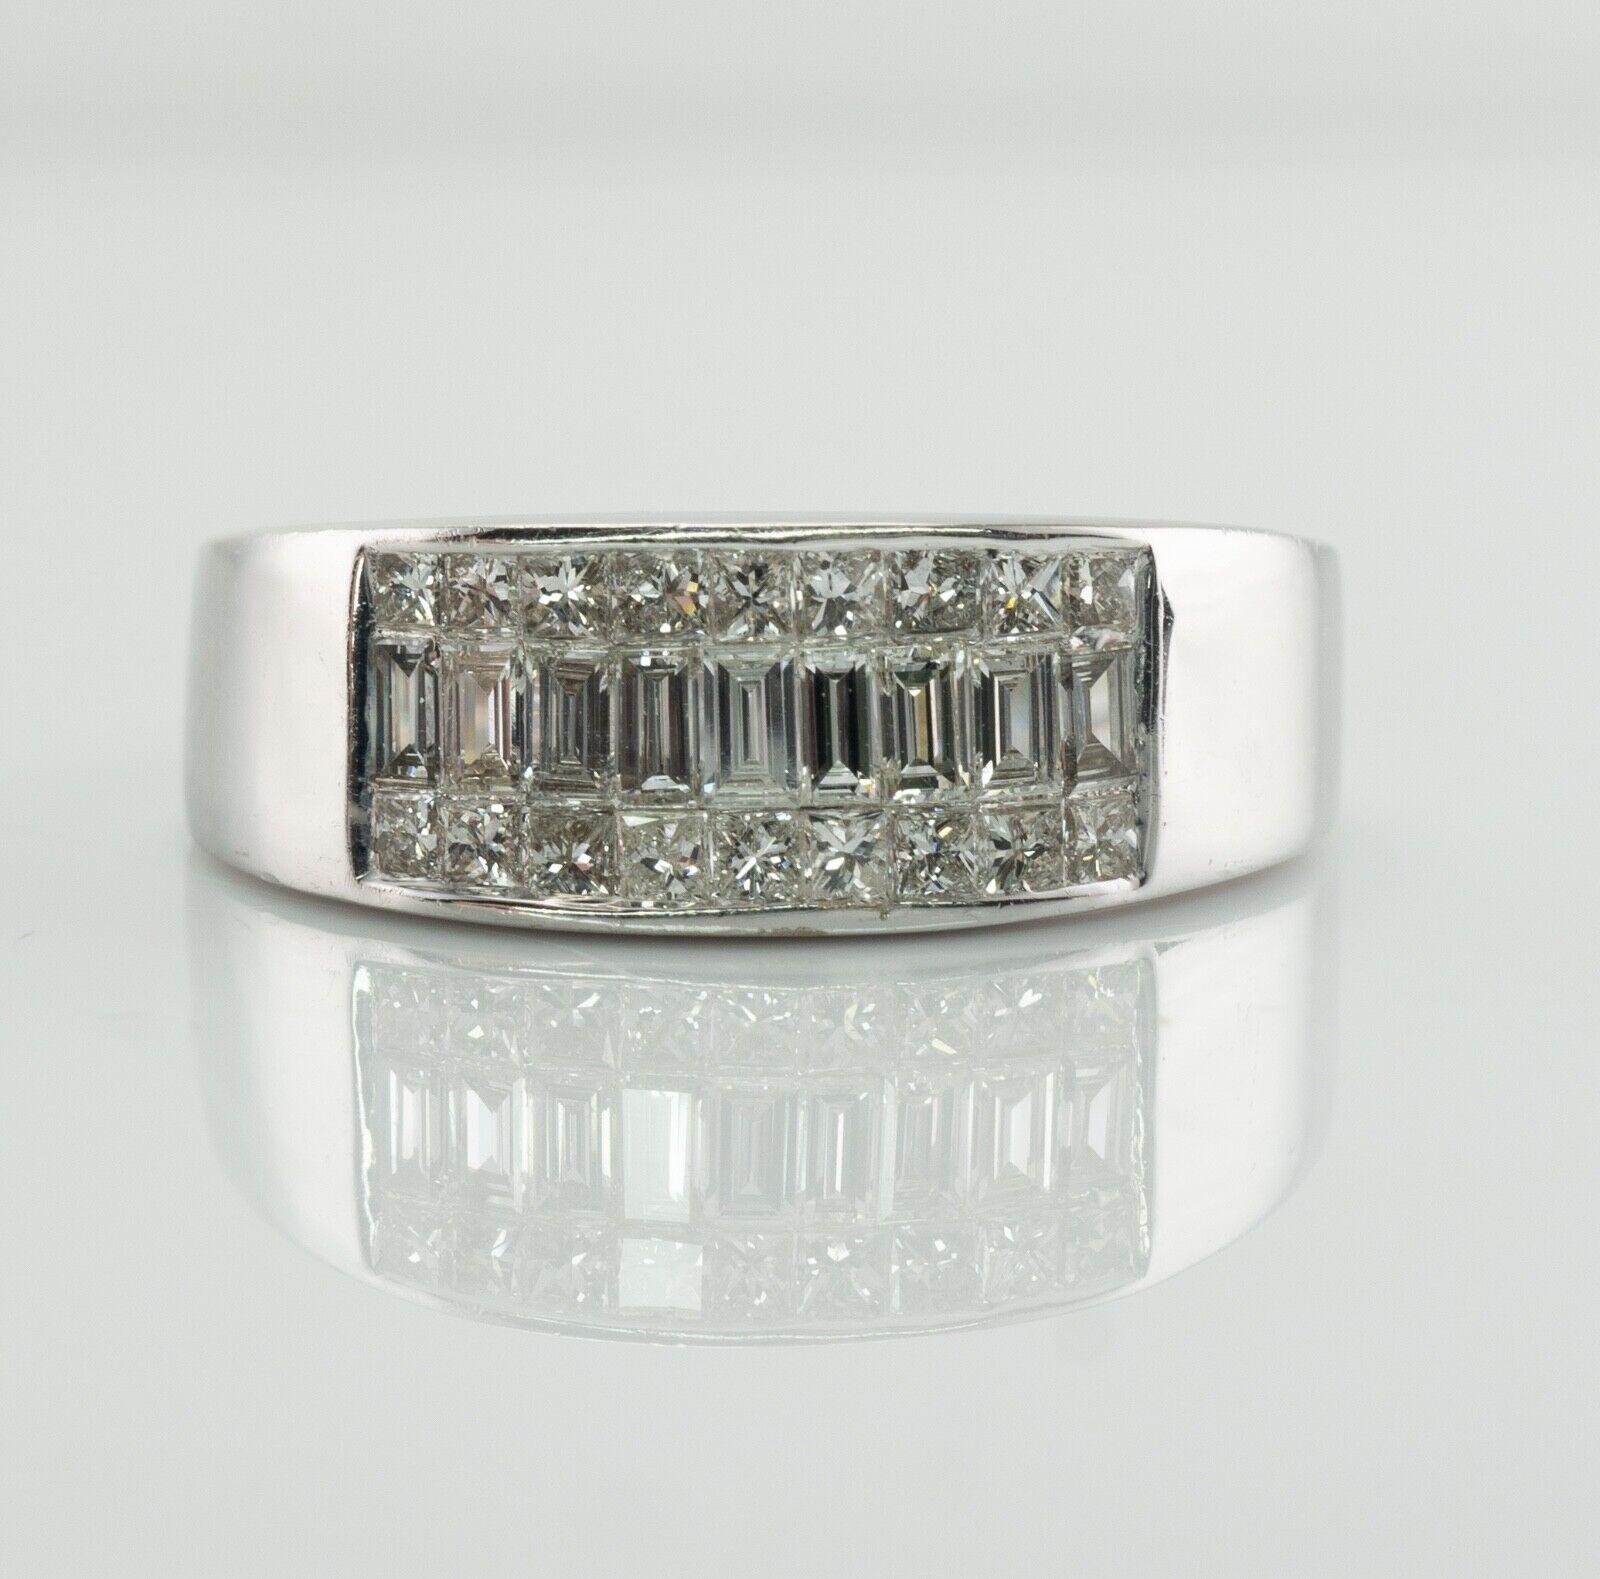 Diamond Ring 14K White Gold Band 1.80cts Anniversary or Wedding
 
This estate ring is crafted in solid 14K White Gold (stamped). 
The band holds 9 diamond baguettes and 18 square cut diamonds = 1.80cts TDW.
The diamonds are very clean VVS2-VS2